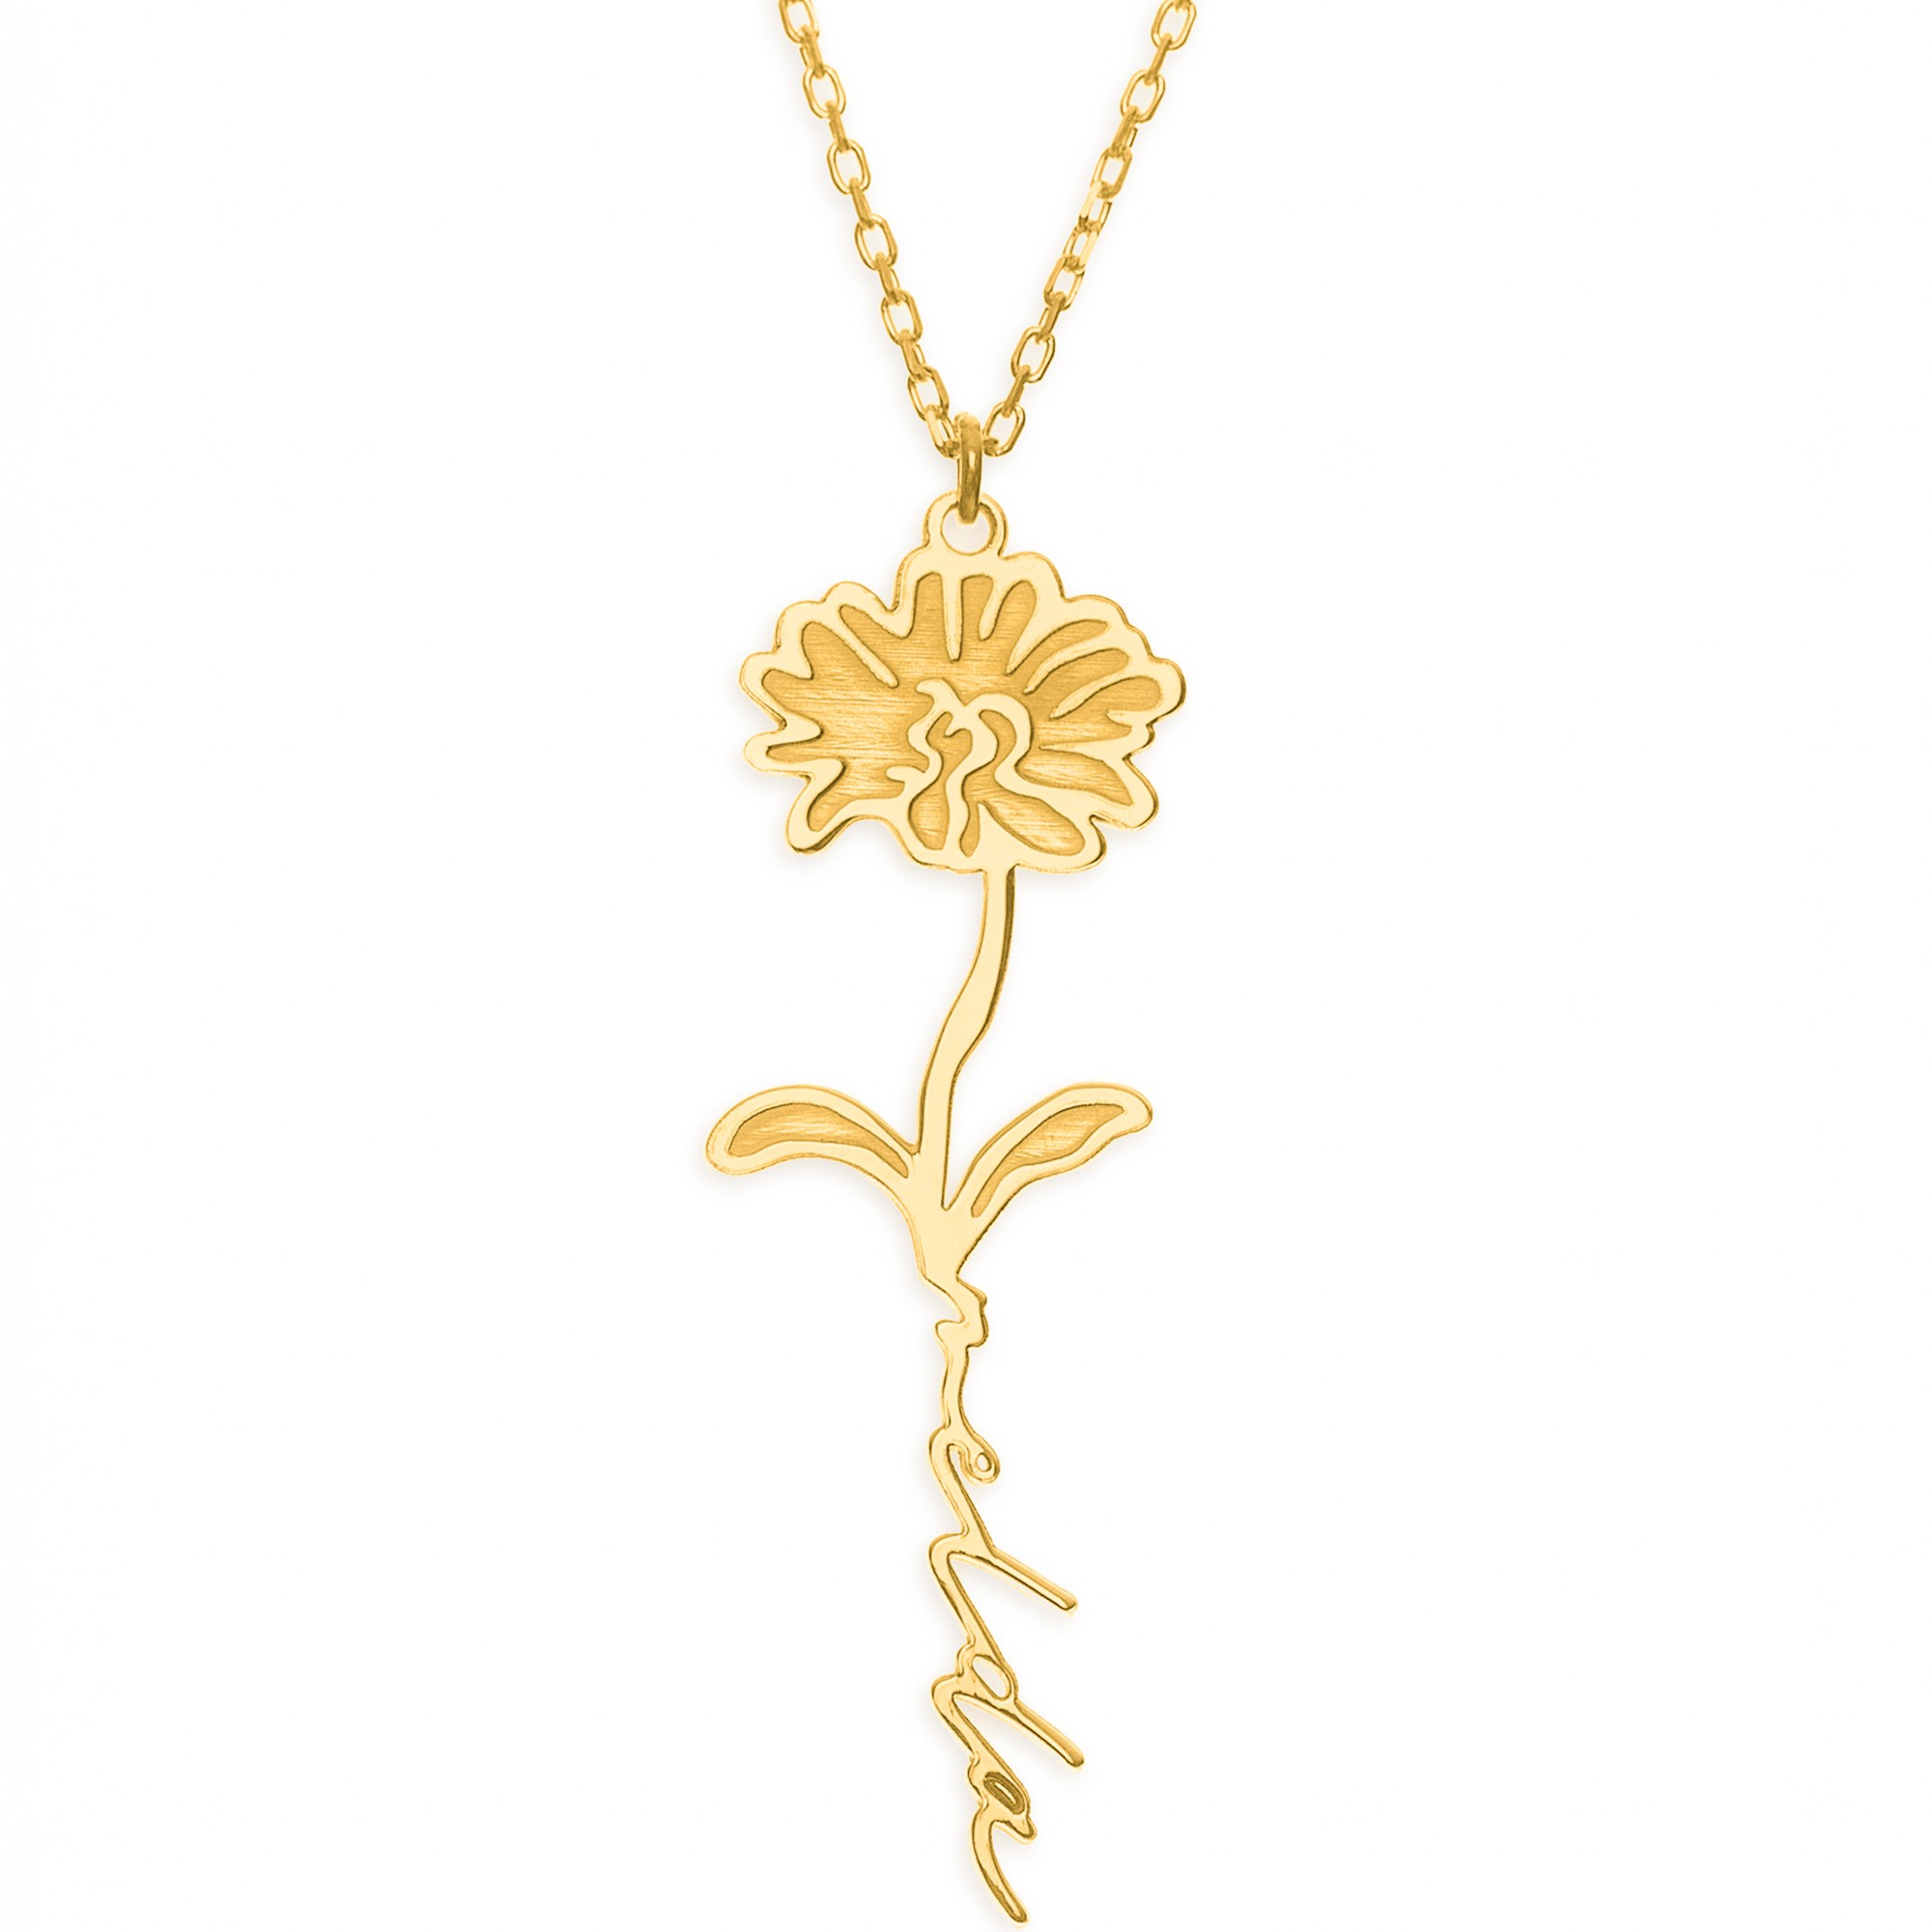 Birth Flower with Name Necklace